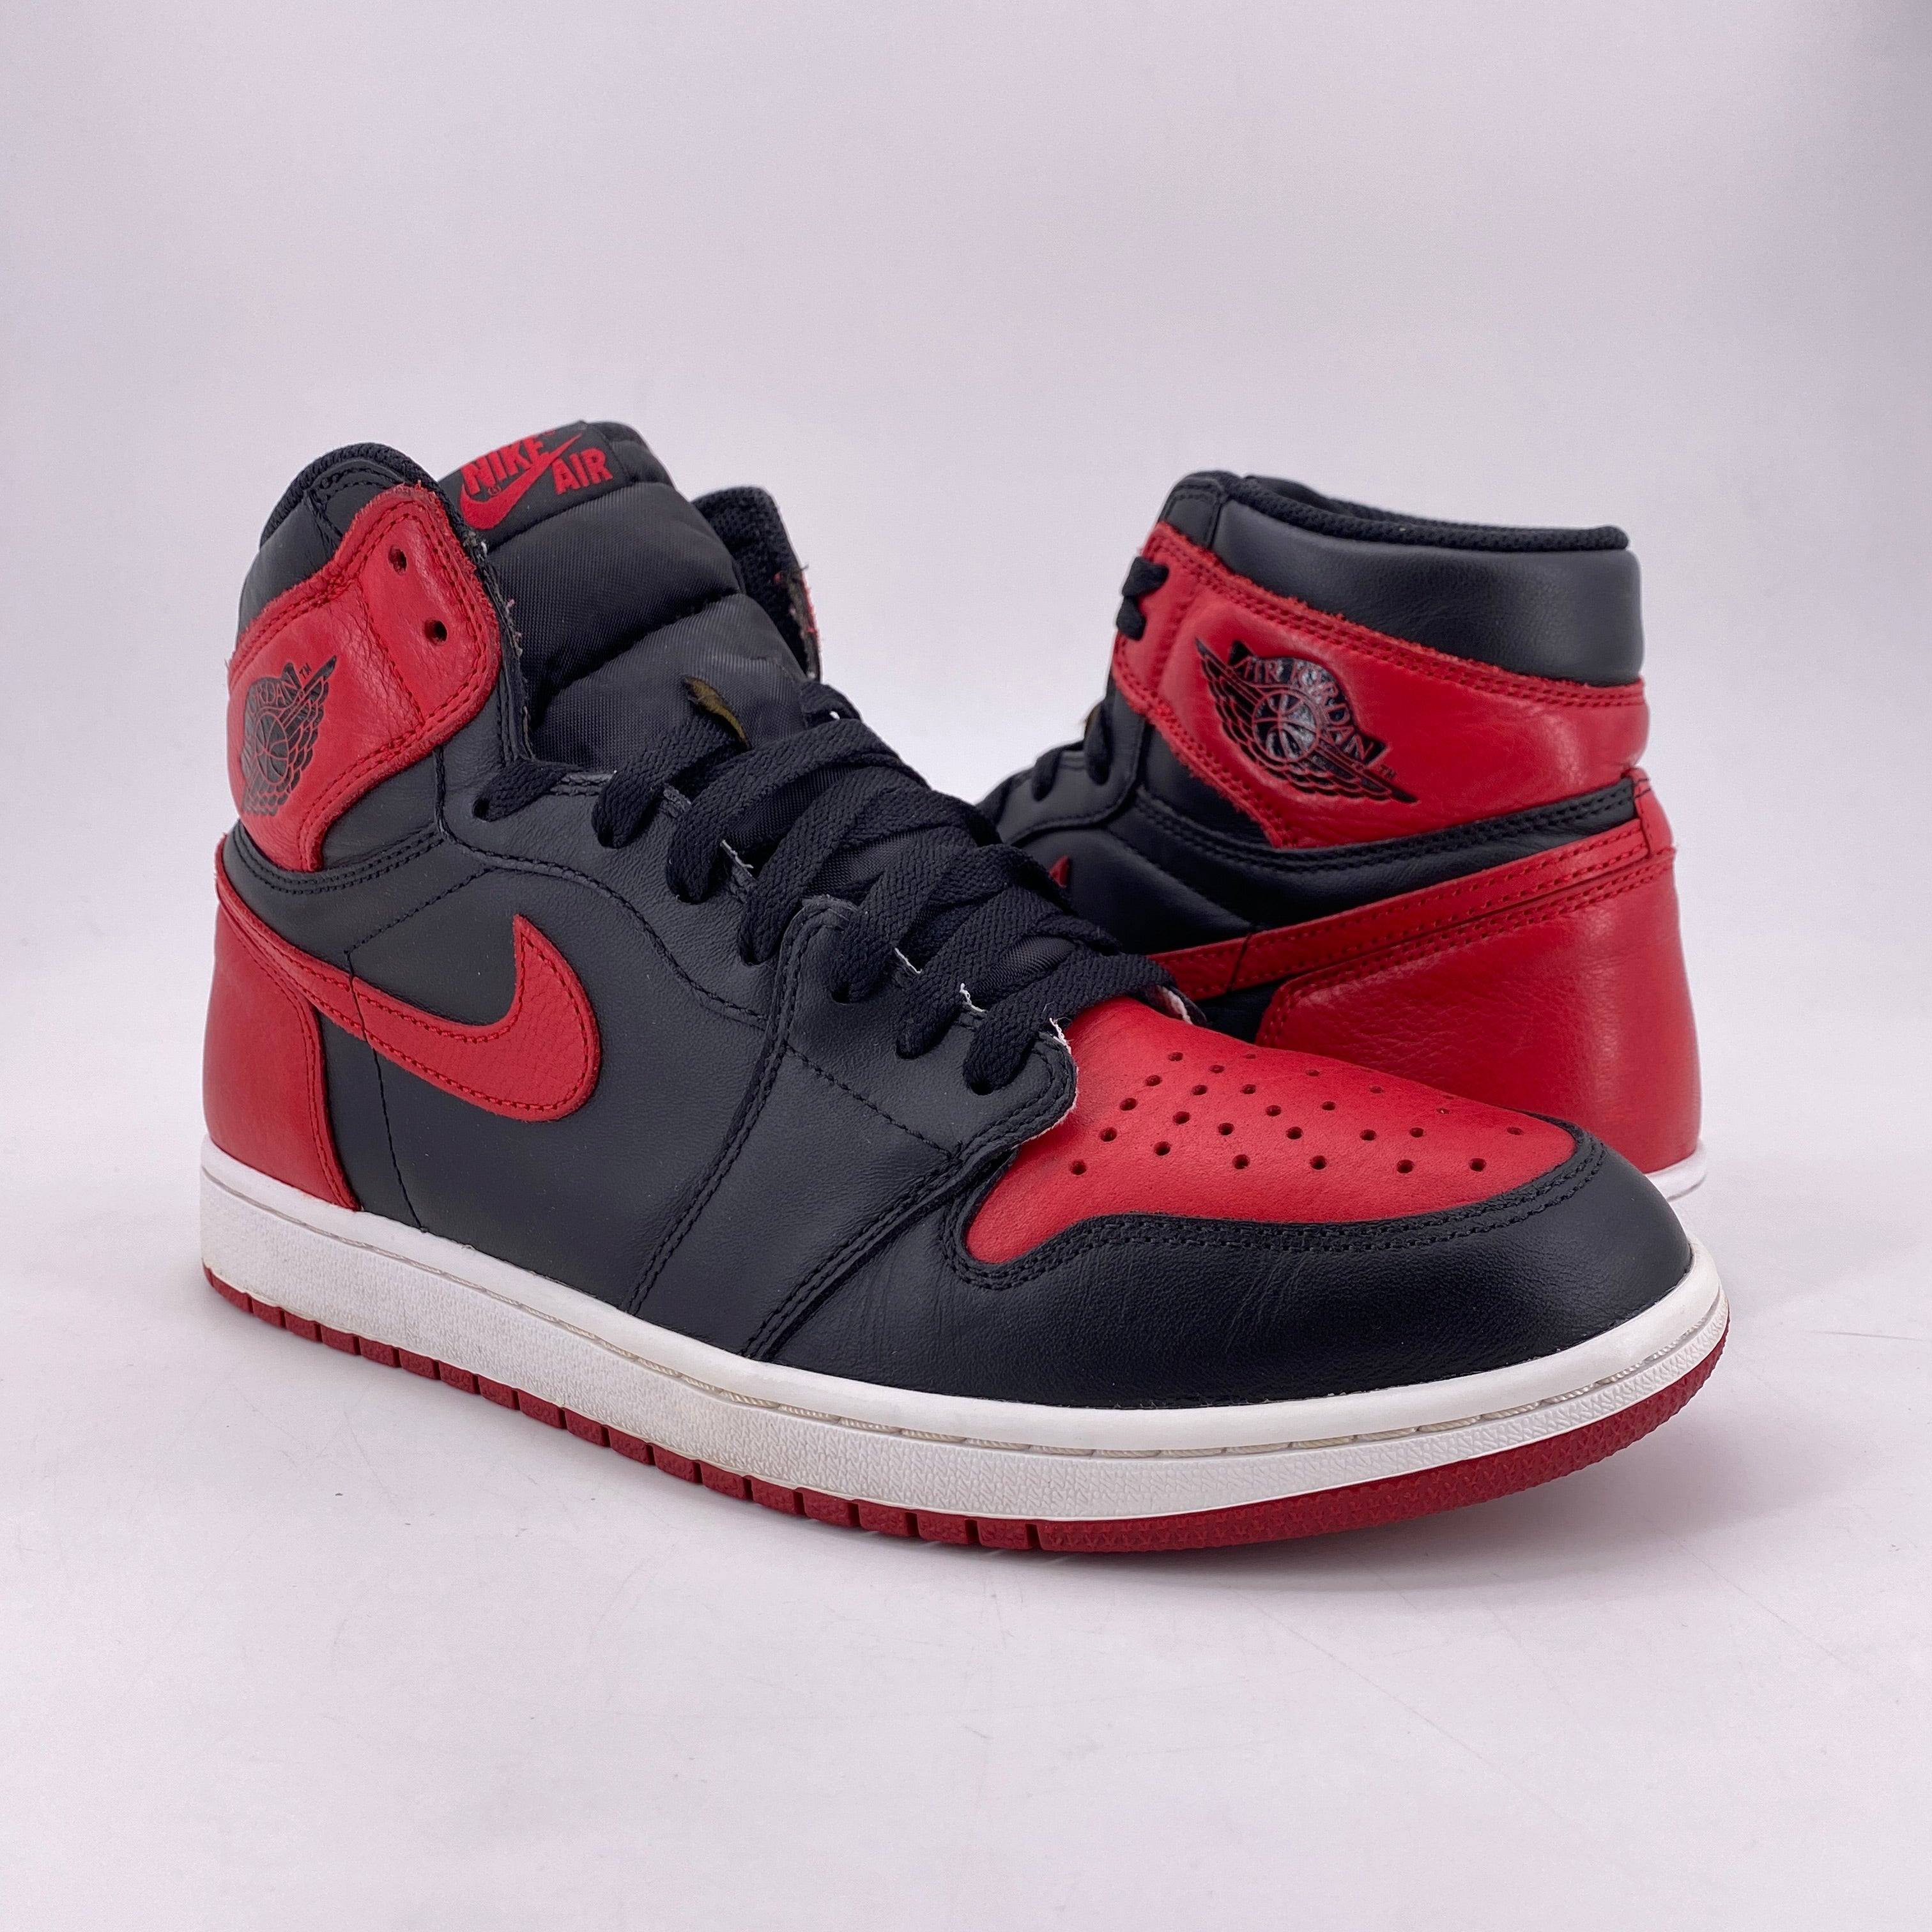 Air Jordan 1 Retro High OG &quot;BANNED&quot; 2016 Used Size 10.5